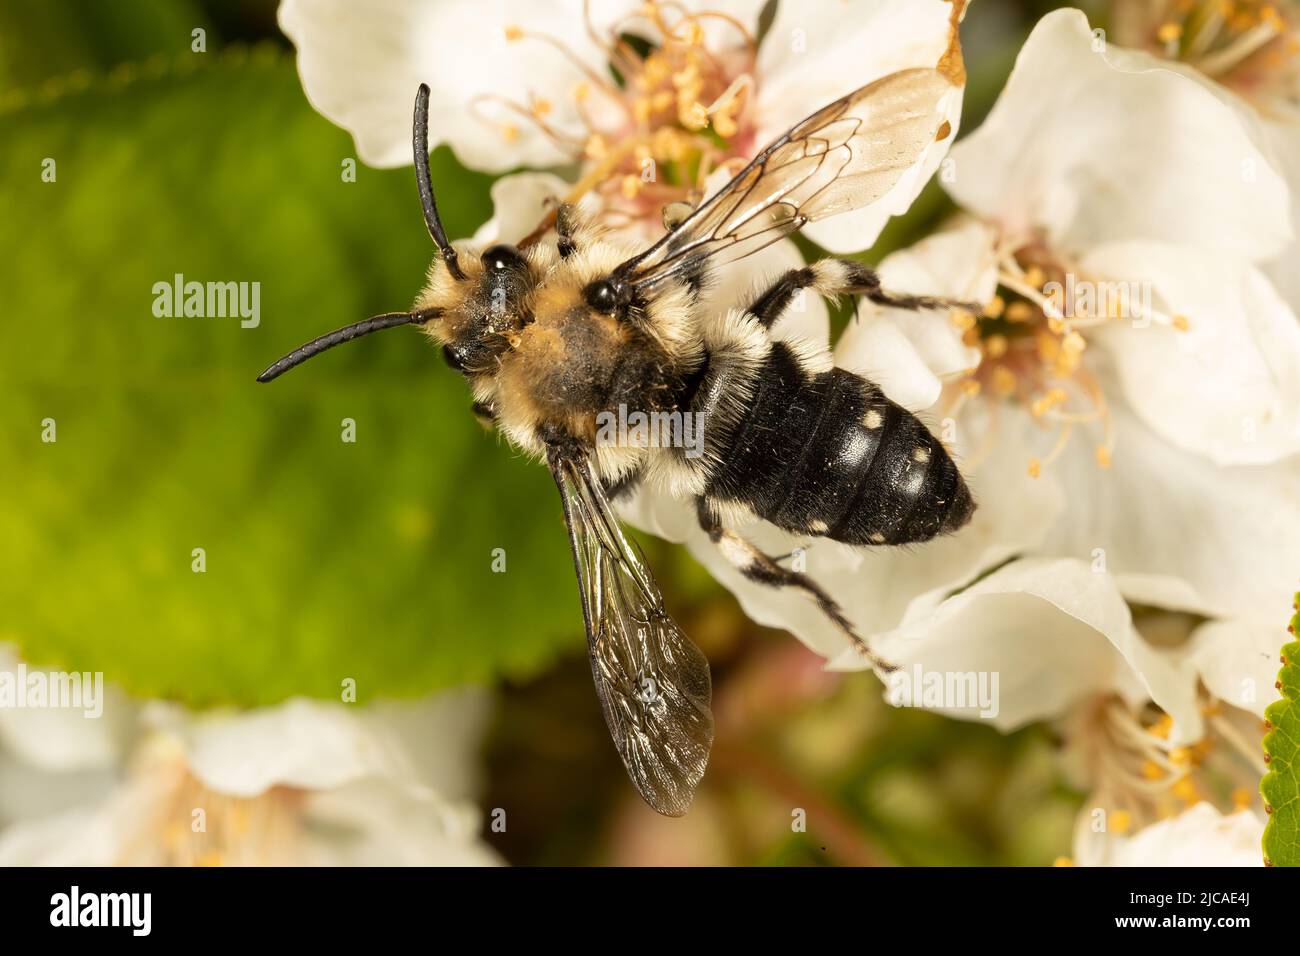 Male Common Mourning Bee on cherry blossom in Kentish garden, England. Stock Photo